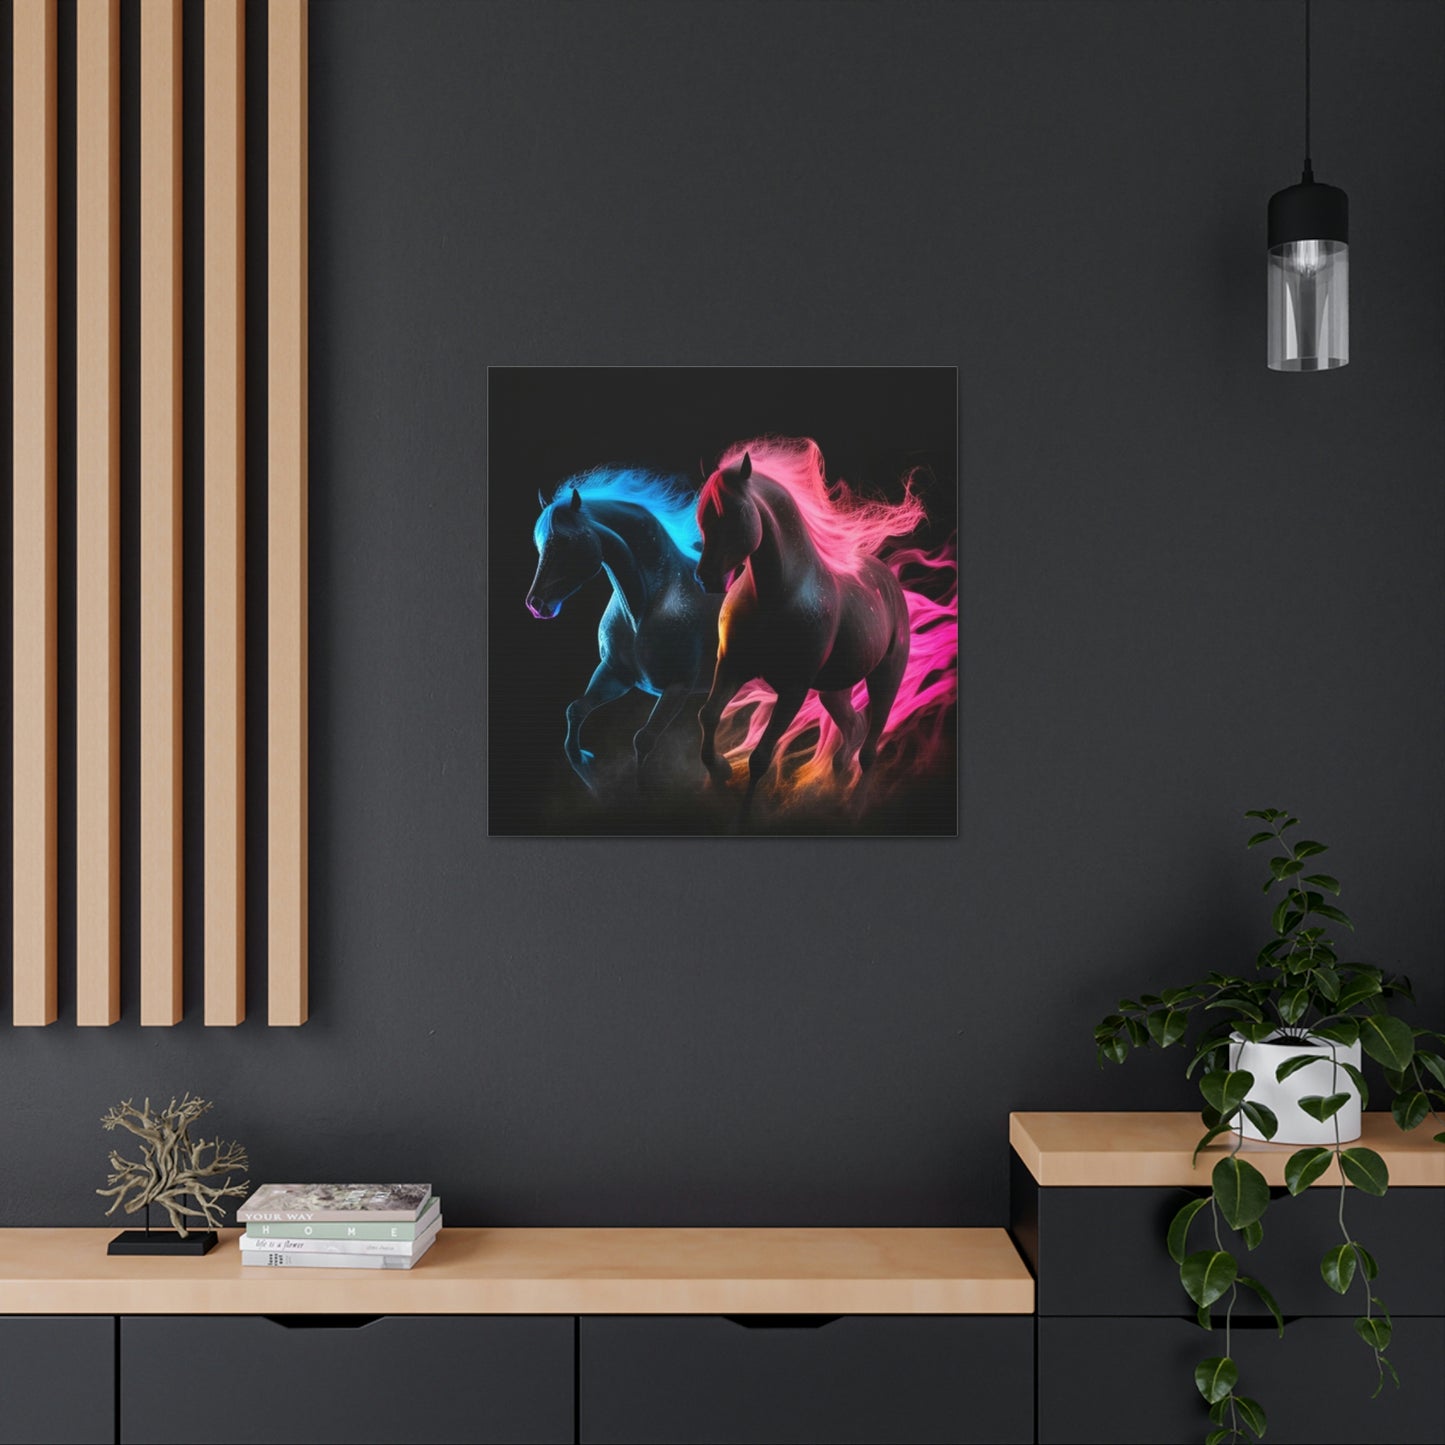 Canvas Gallery Wraps Horses Pink Blue Fire 2